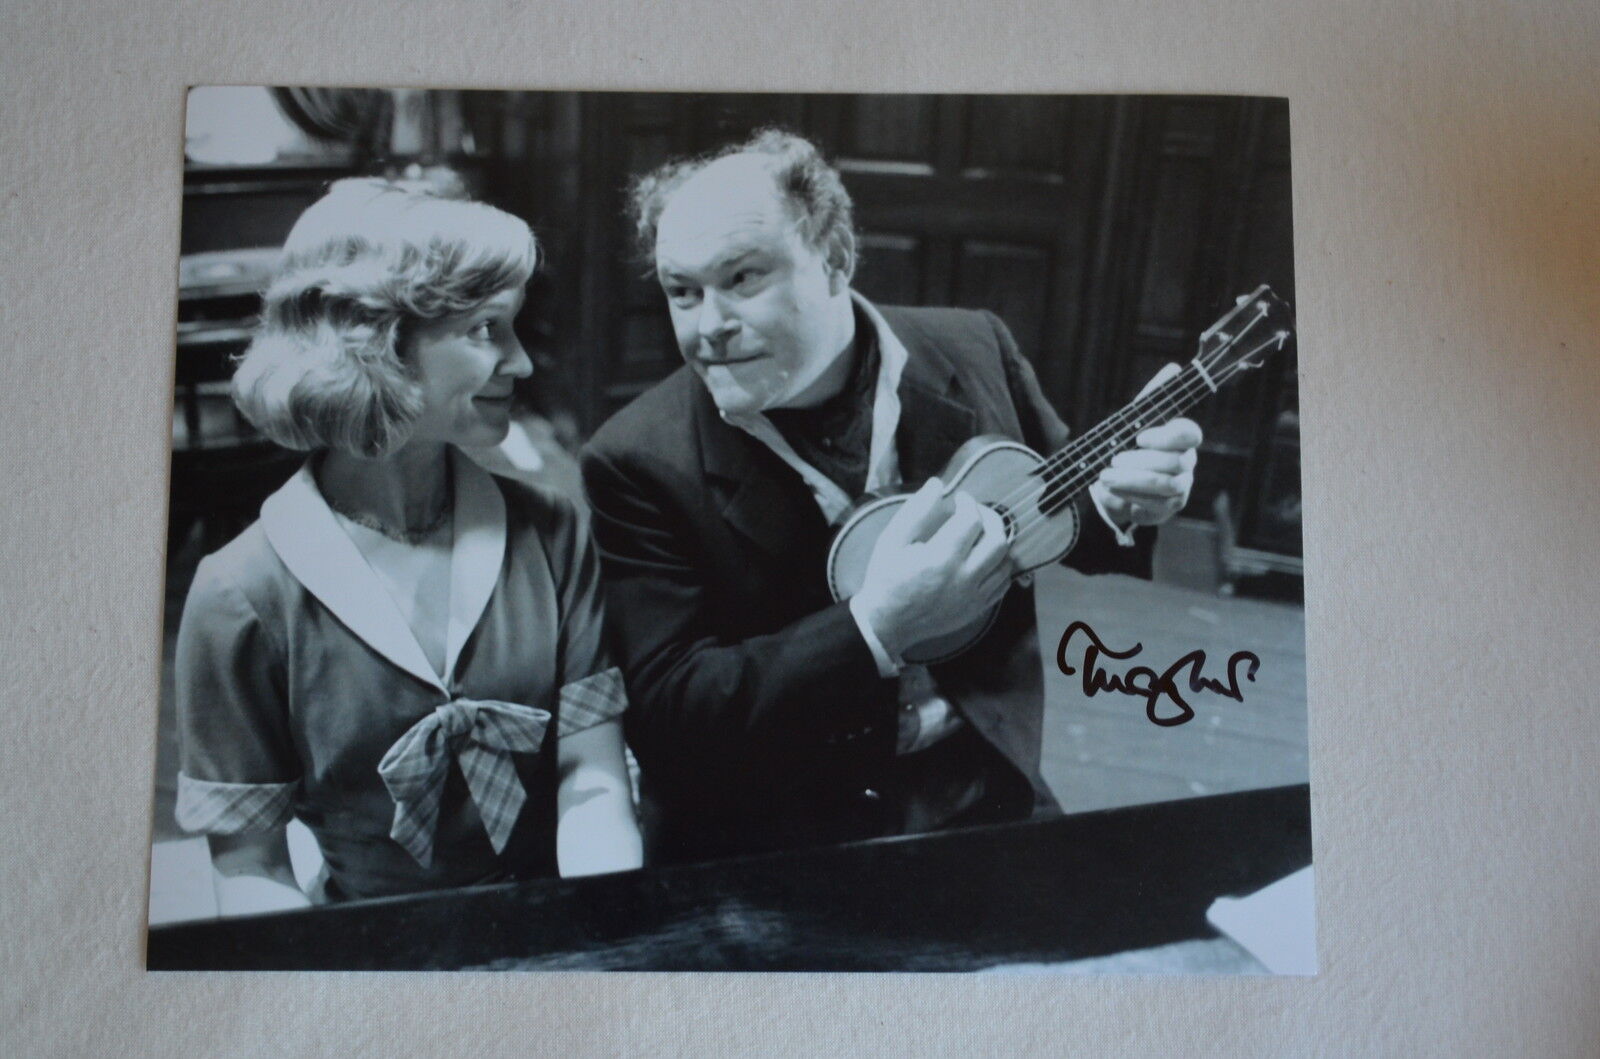 TIMOTHY WEST signed autograph In Person 8x10 (20x25 cm) Photo Poster painting HEDDA